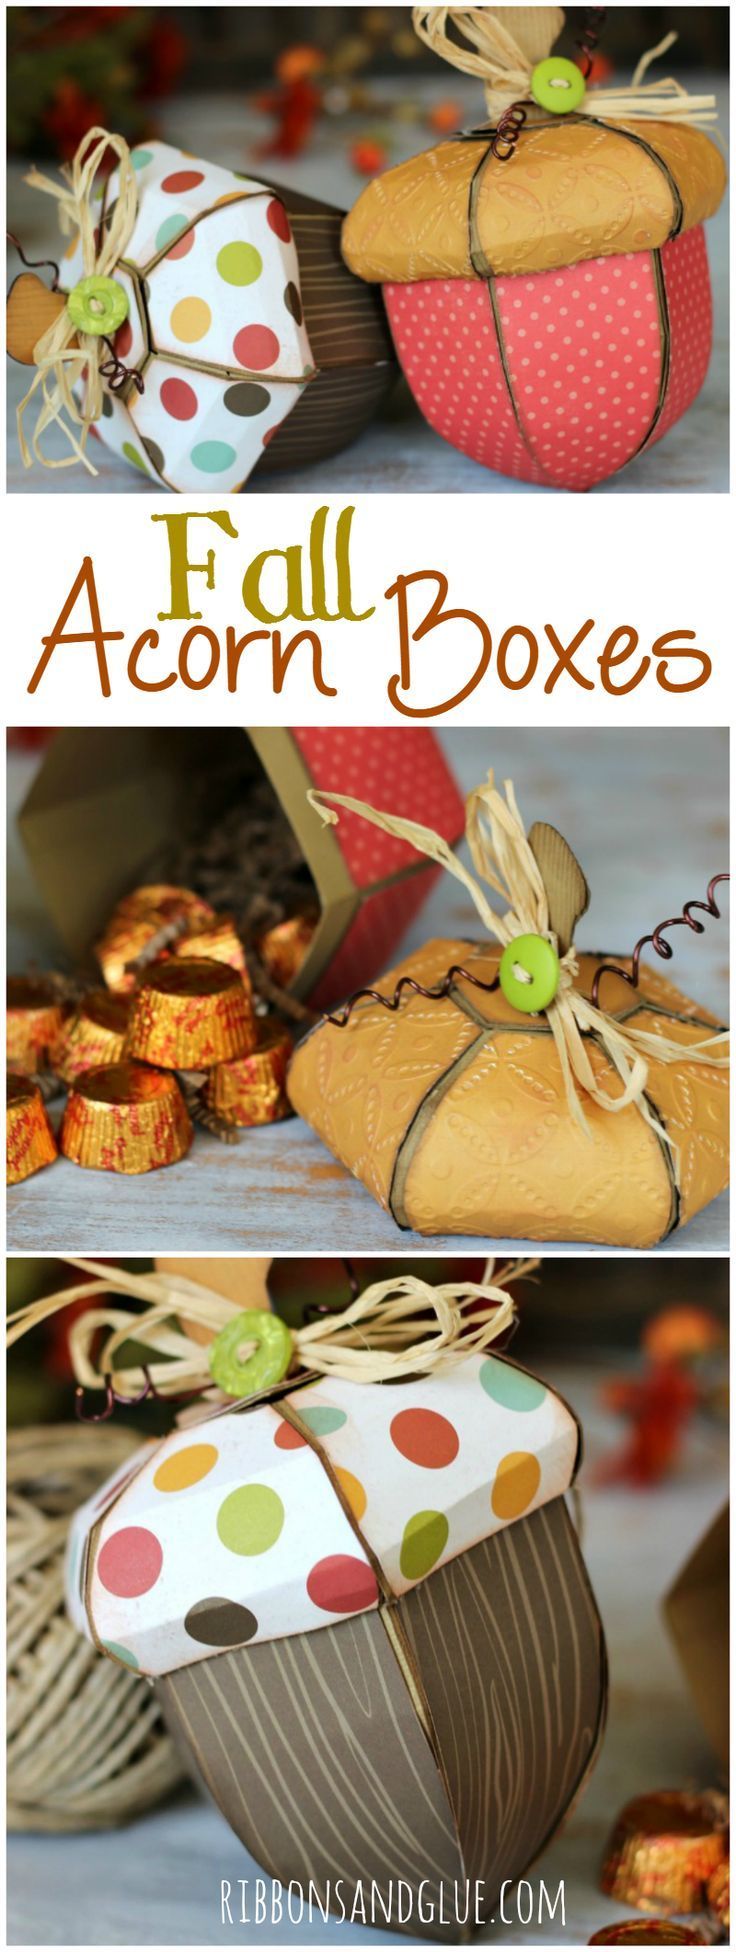 Fall Acorn Boxes -   24 fall paper crafts
 ideas